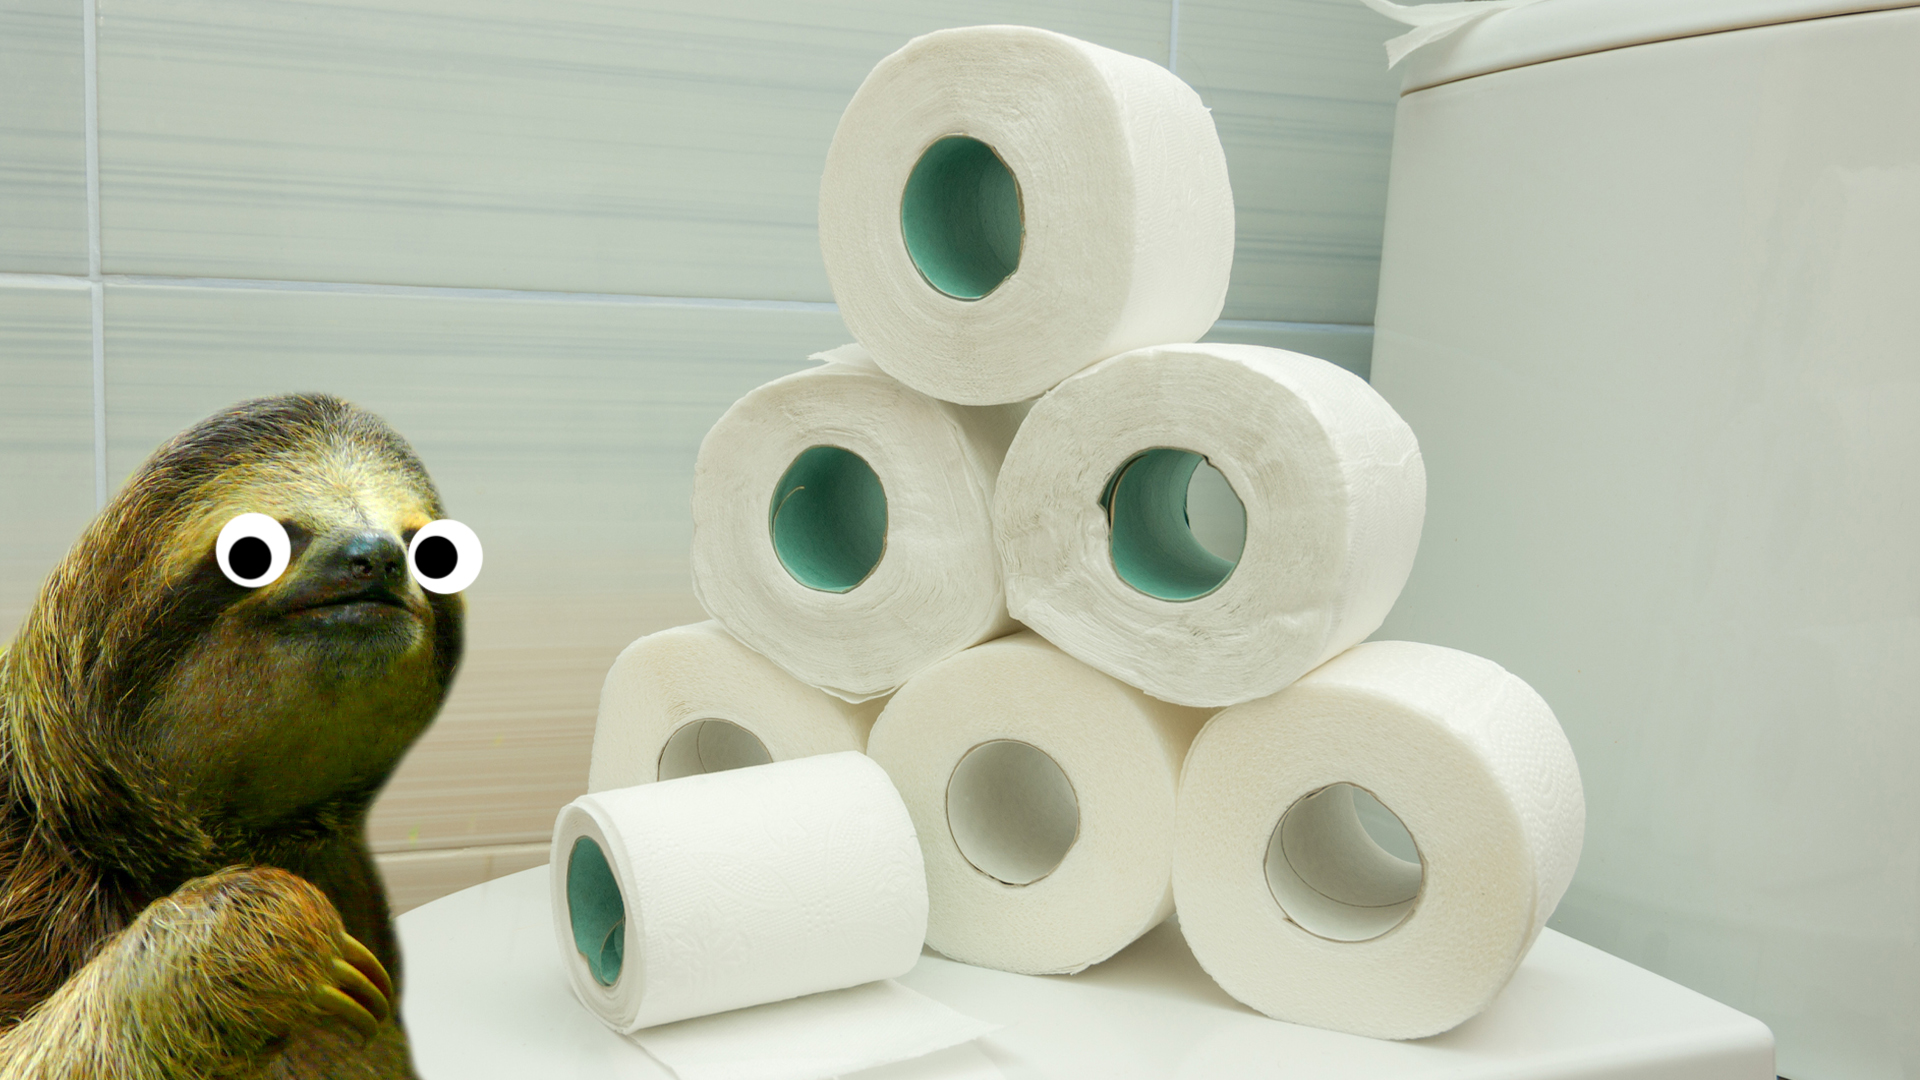 A sloth next to a big pile of toilet rolls